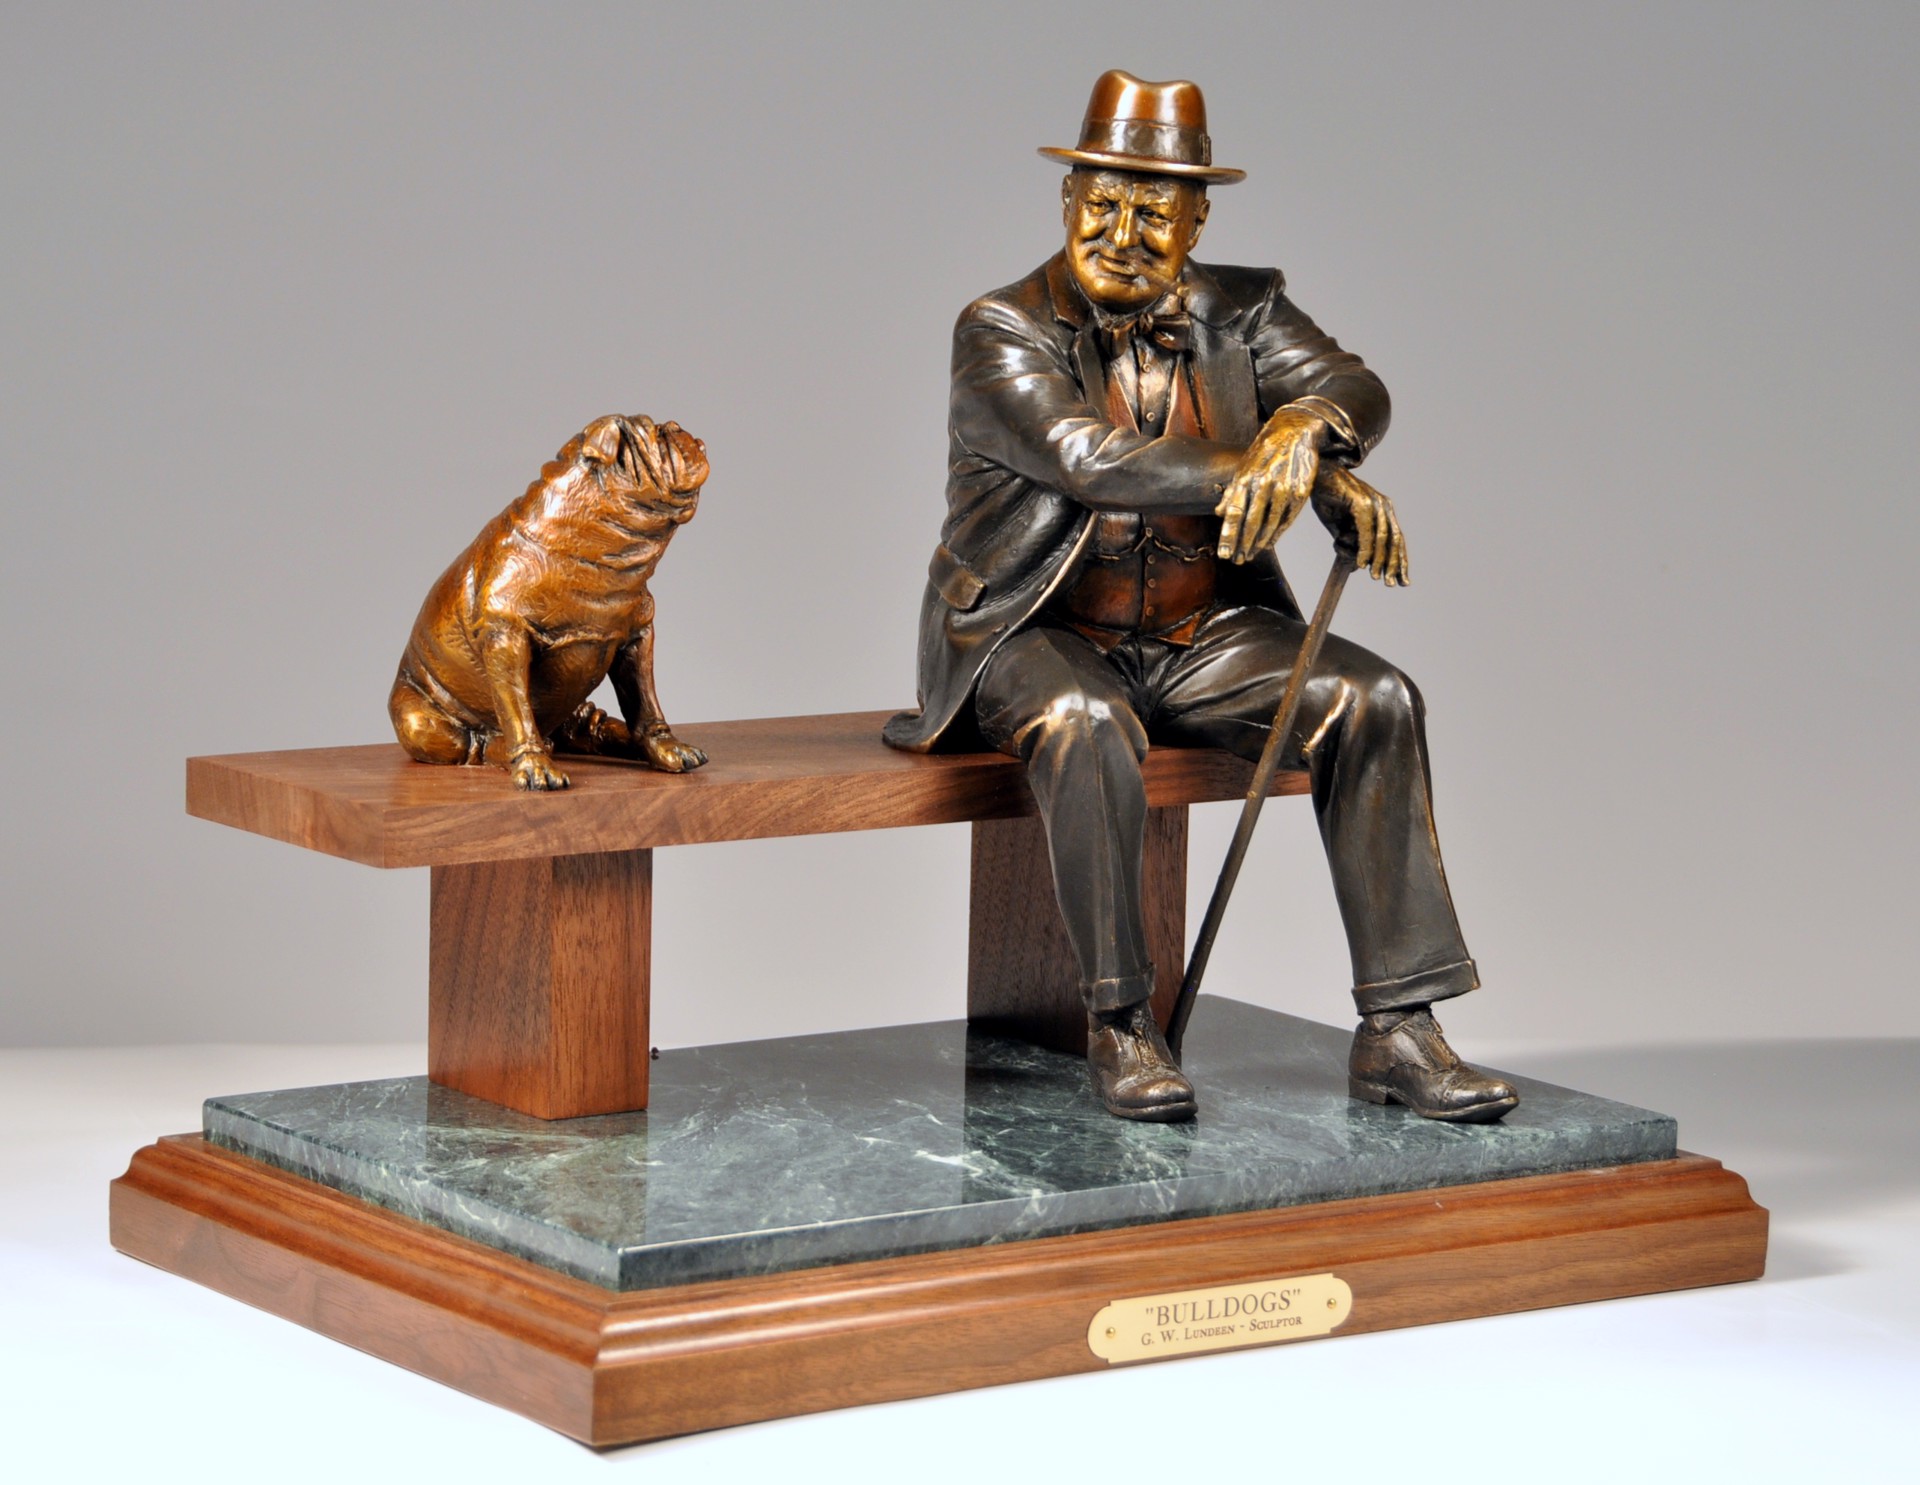 Bulldogs (Churchill by George Lundeen